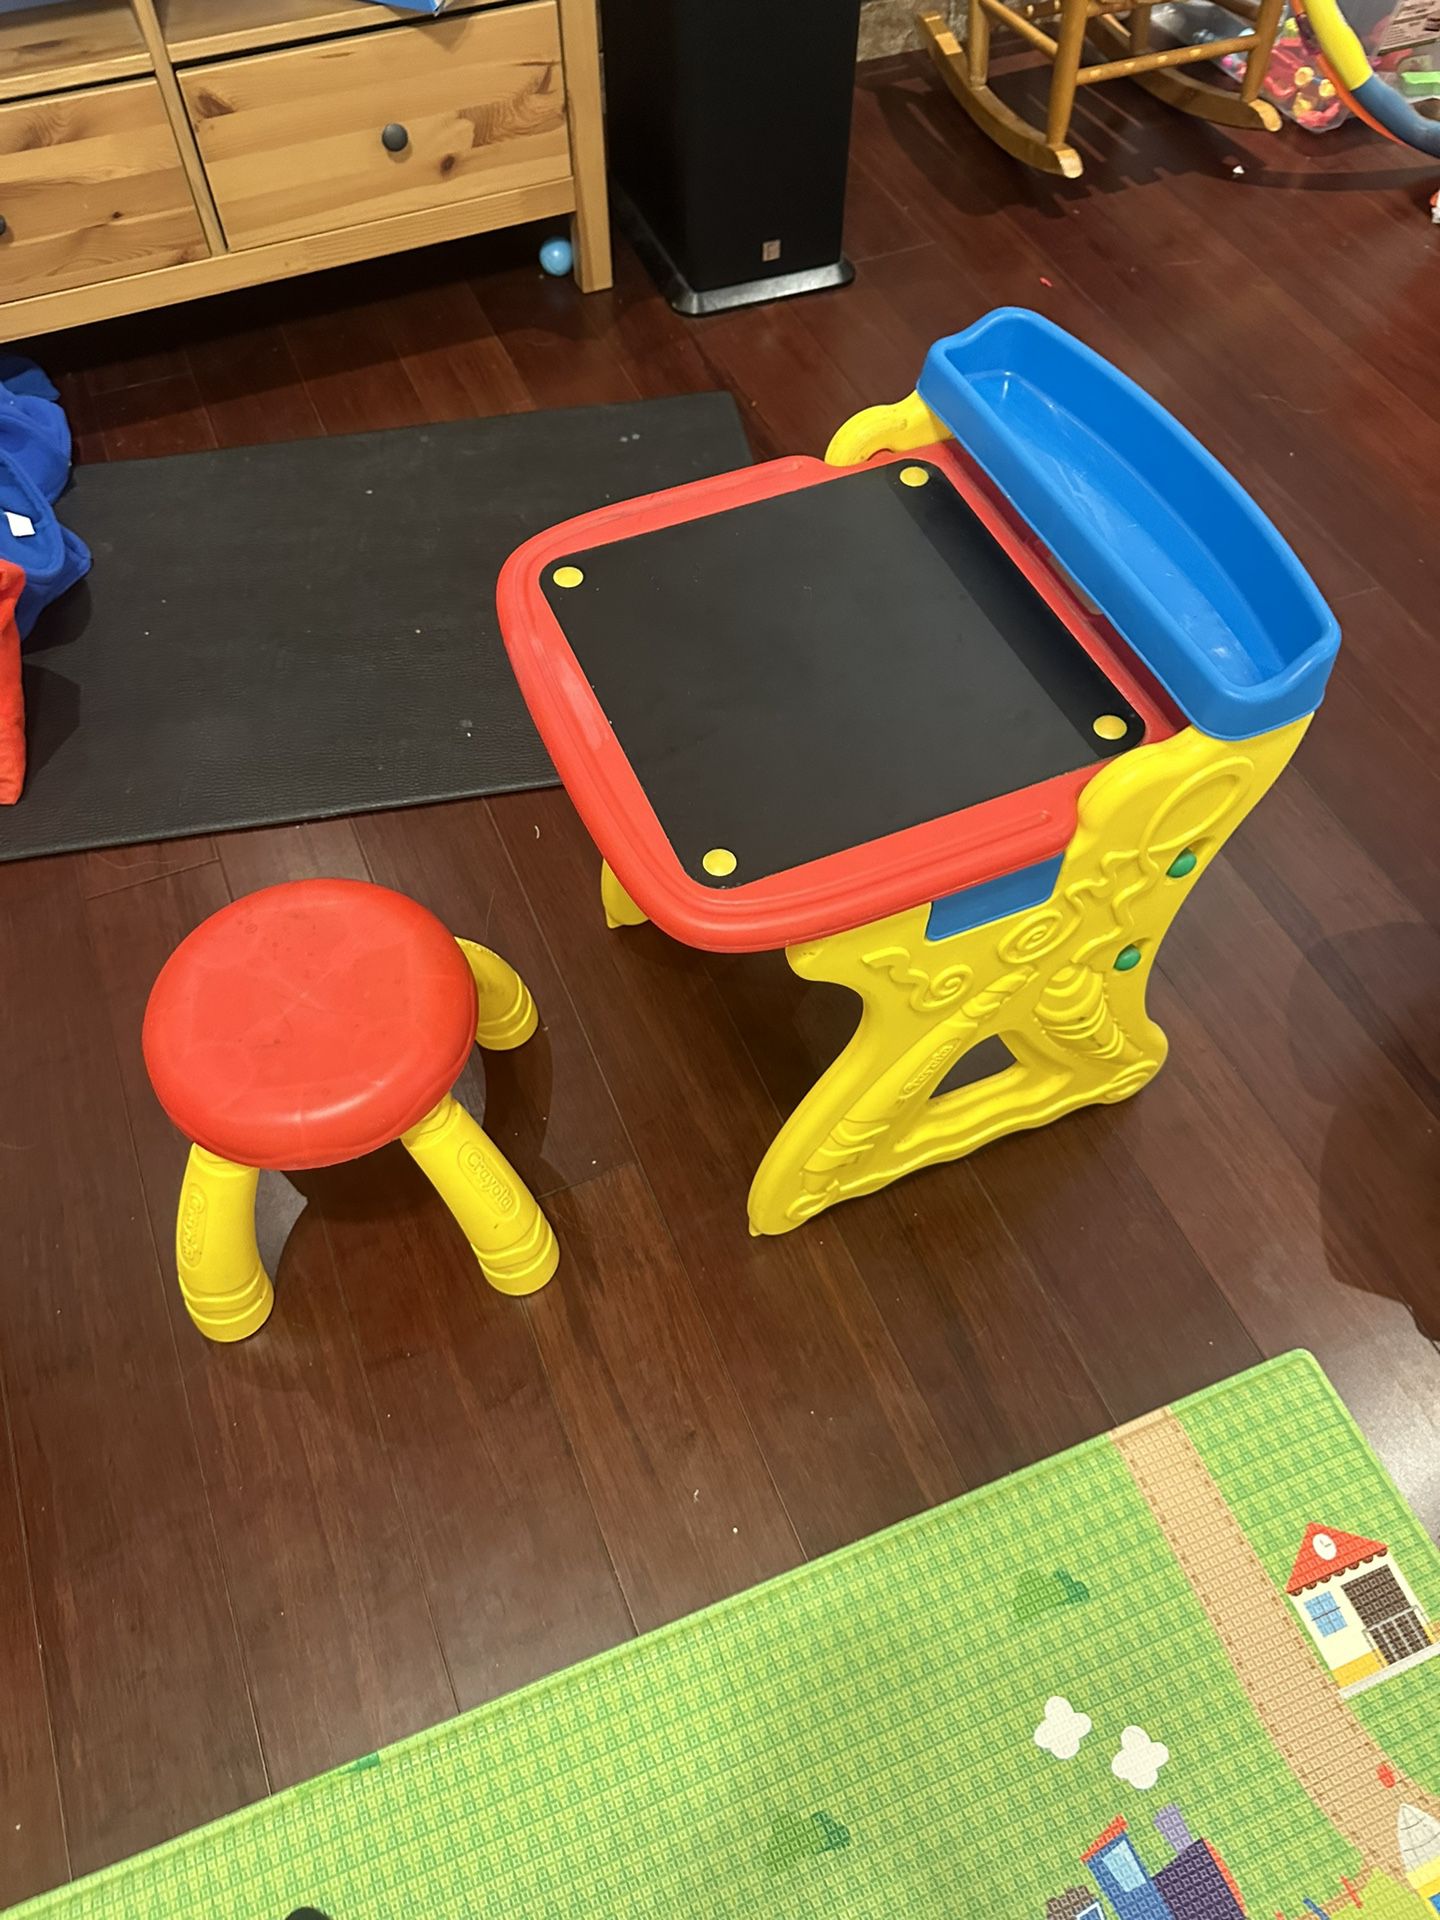 Crayola Play 'N Fold 2-in-1 Art Studio Easel Desk and Chair